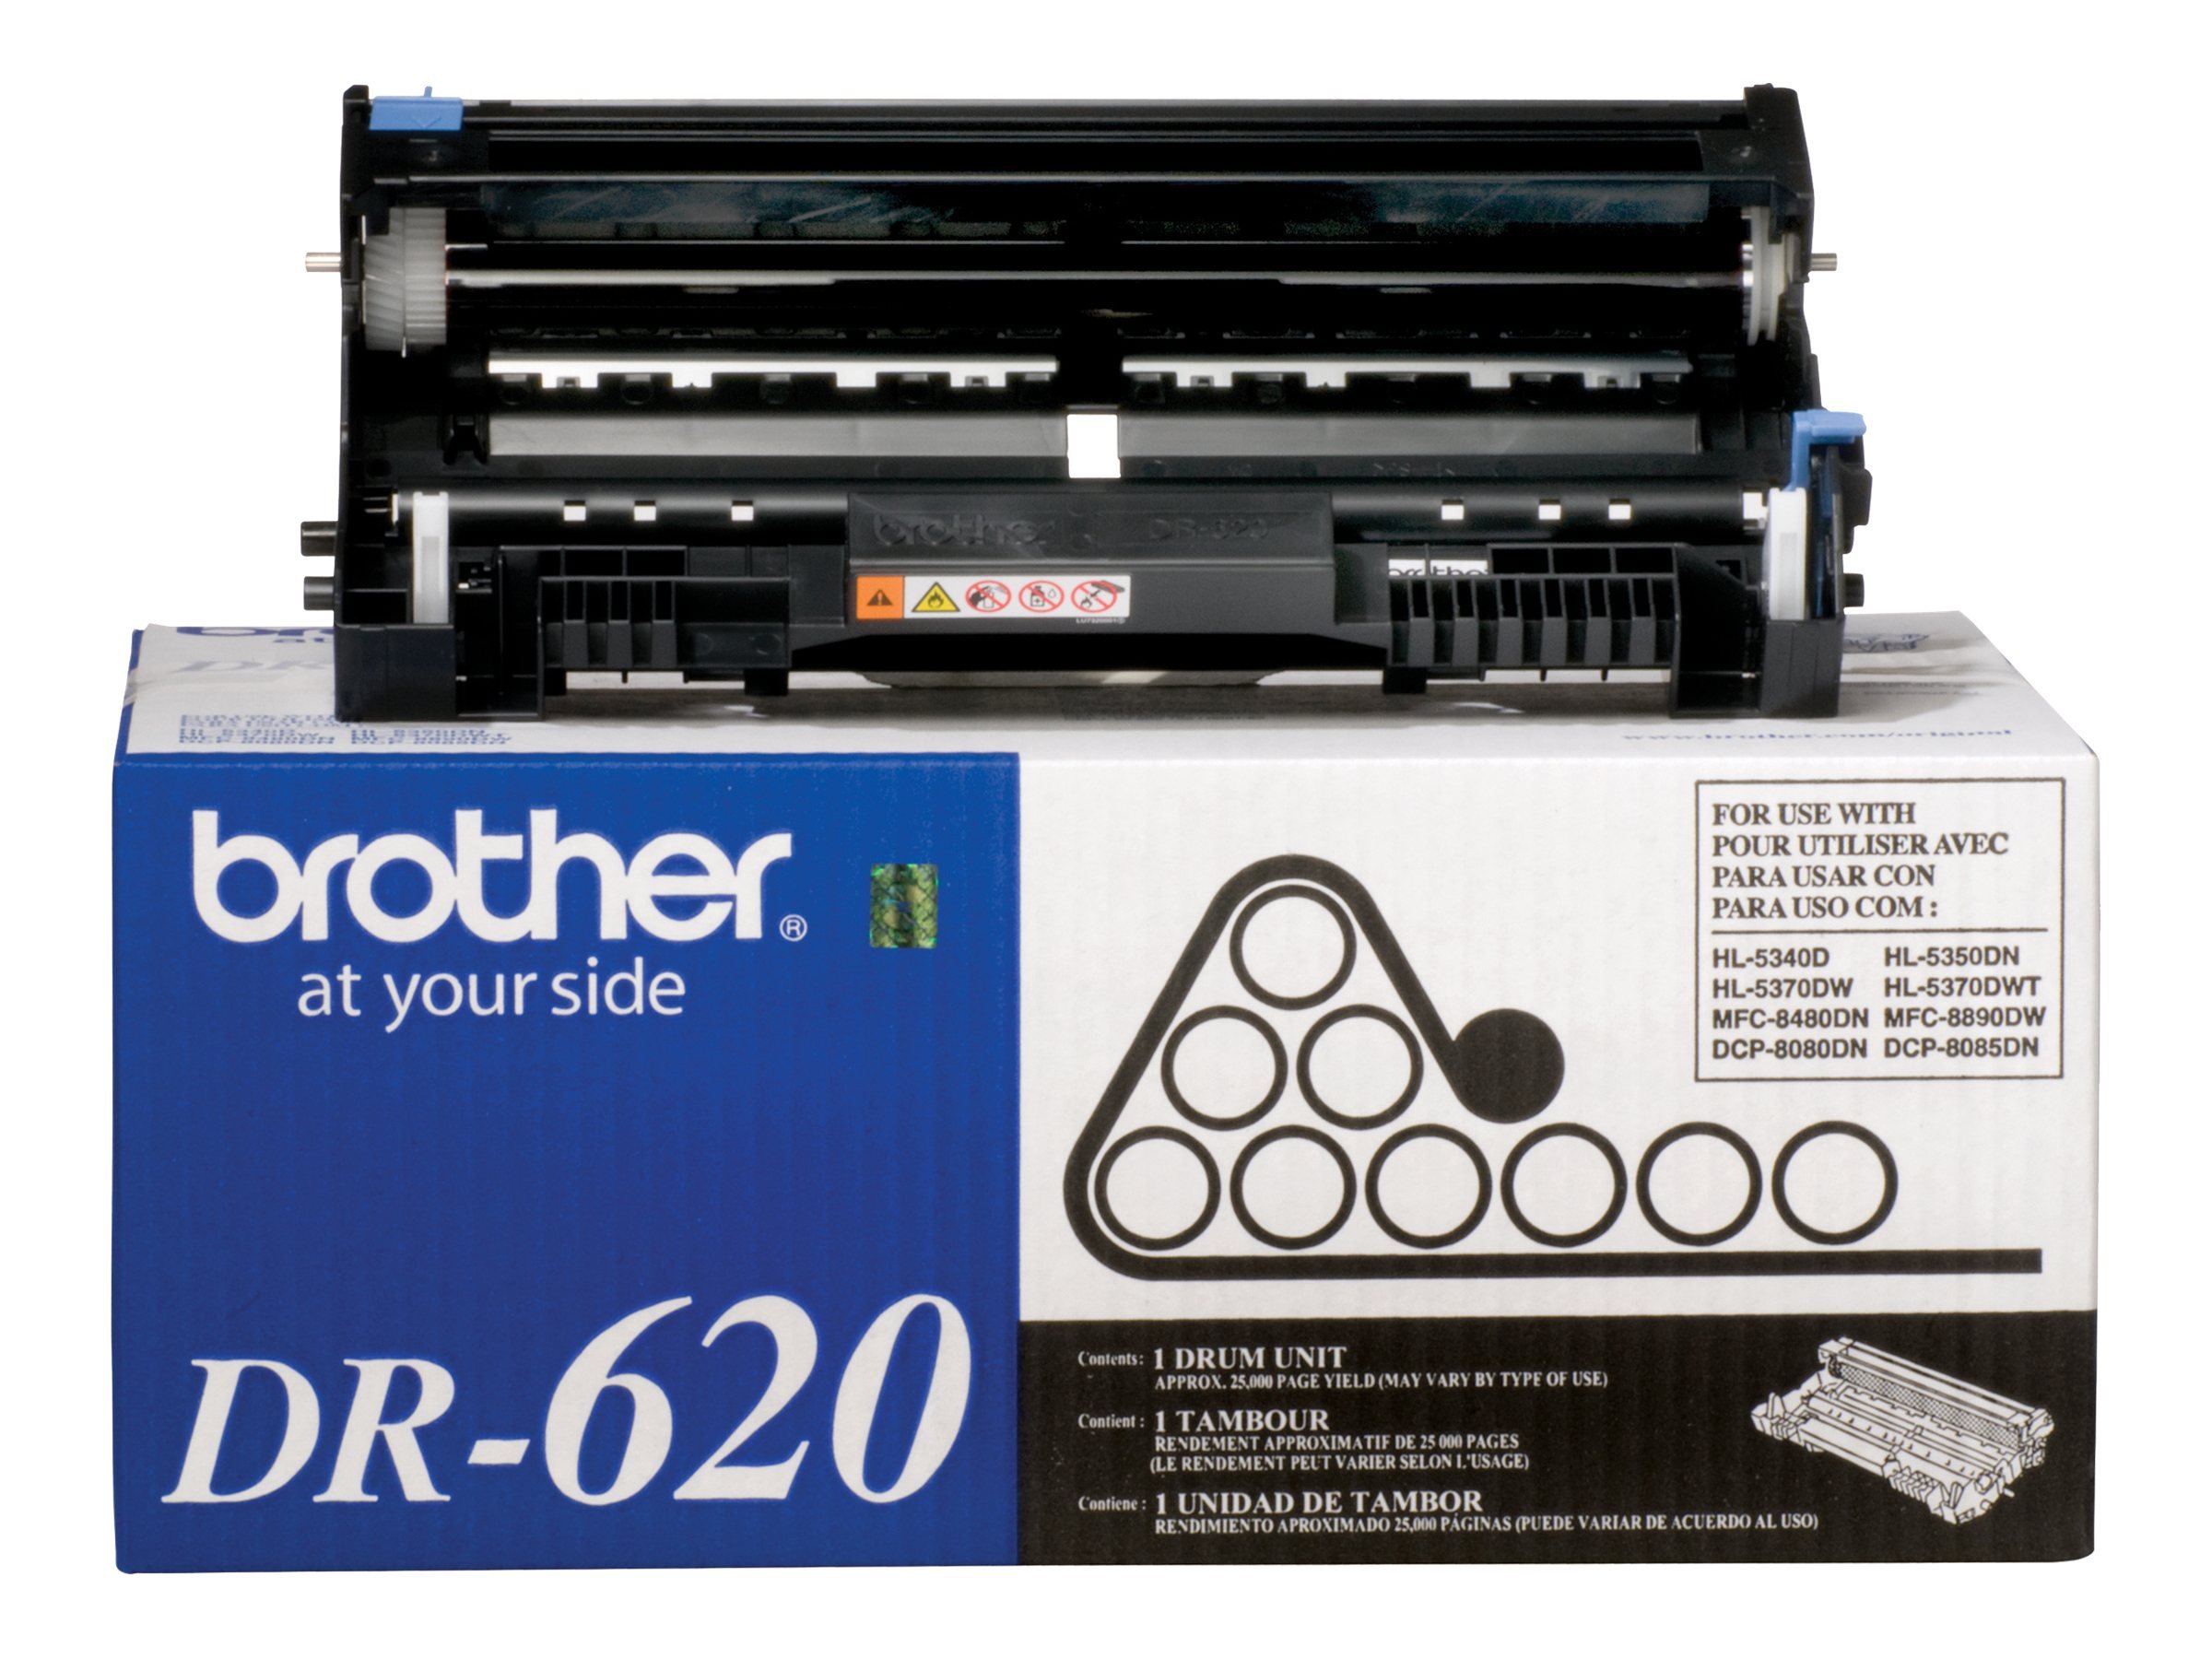  Ed  Tambor Brother Dr620 12 000 Paginas P 2360Dw - BROTHER